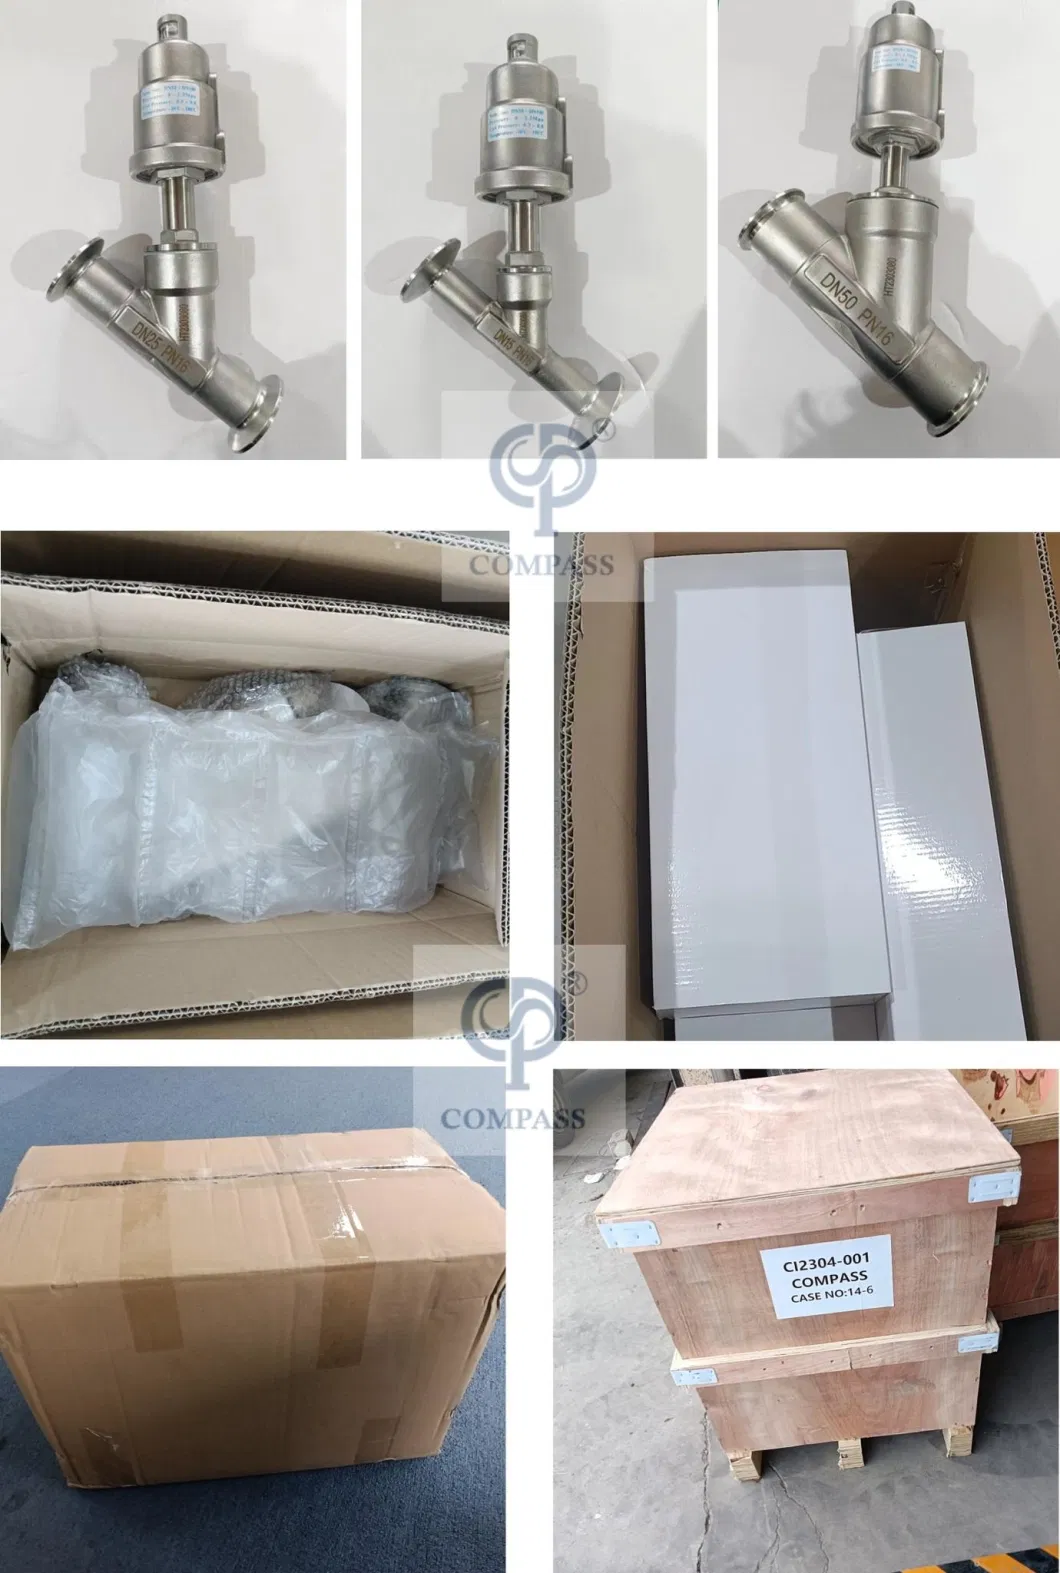 DN32 Stainless Steel Sanitary Tri Clamp 3 Way Pneumatic Valve Angle Seat Valve